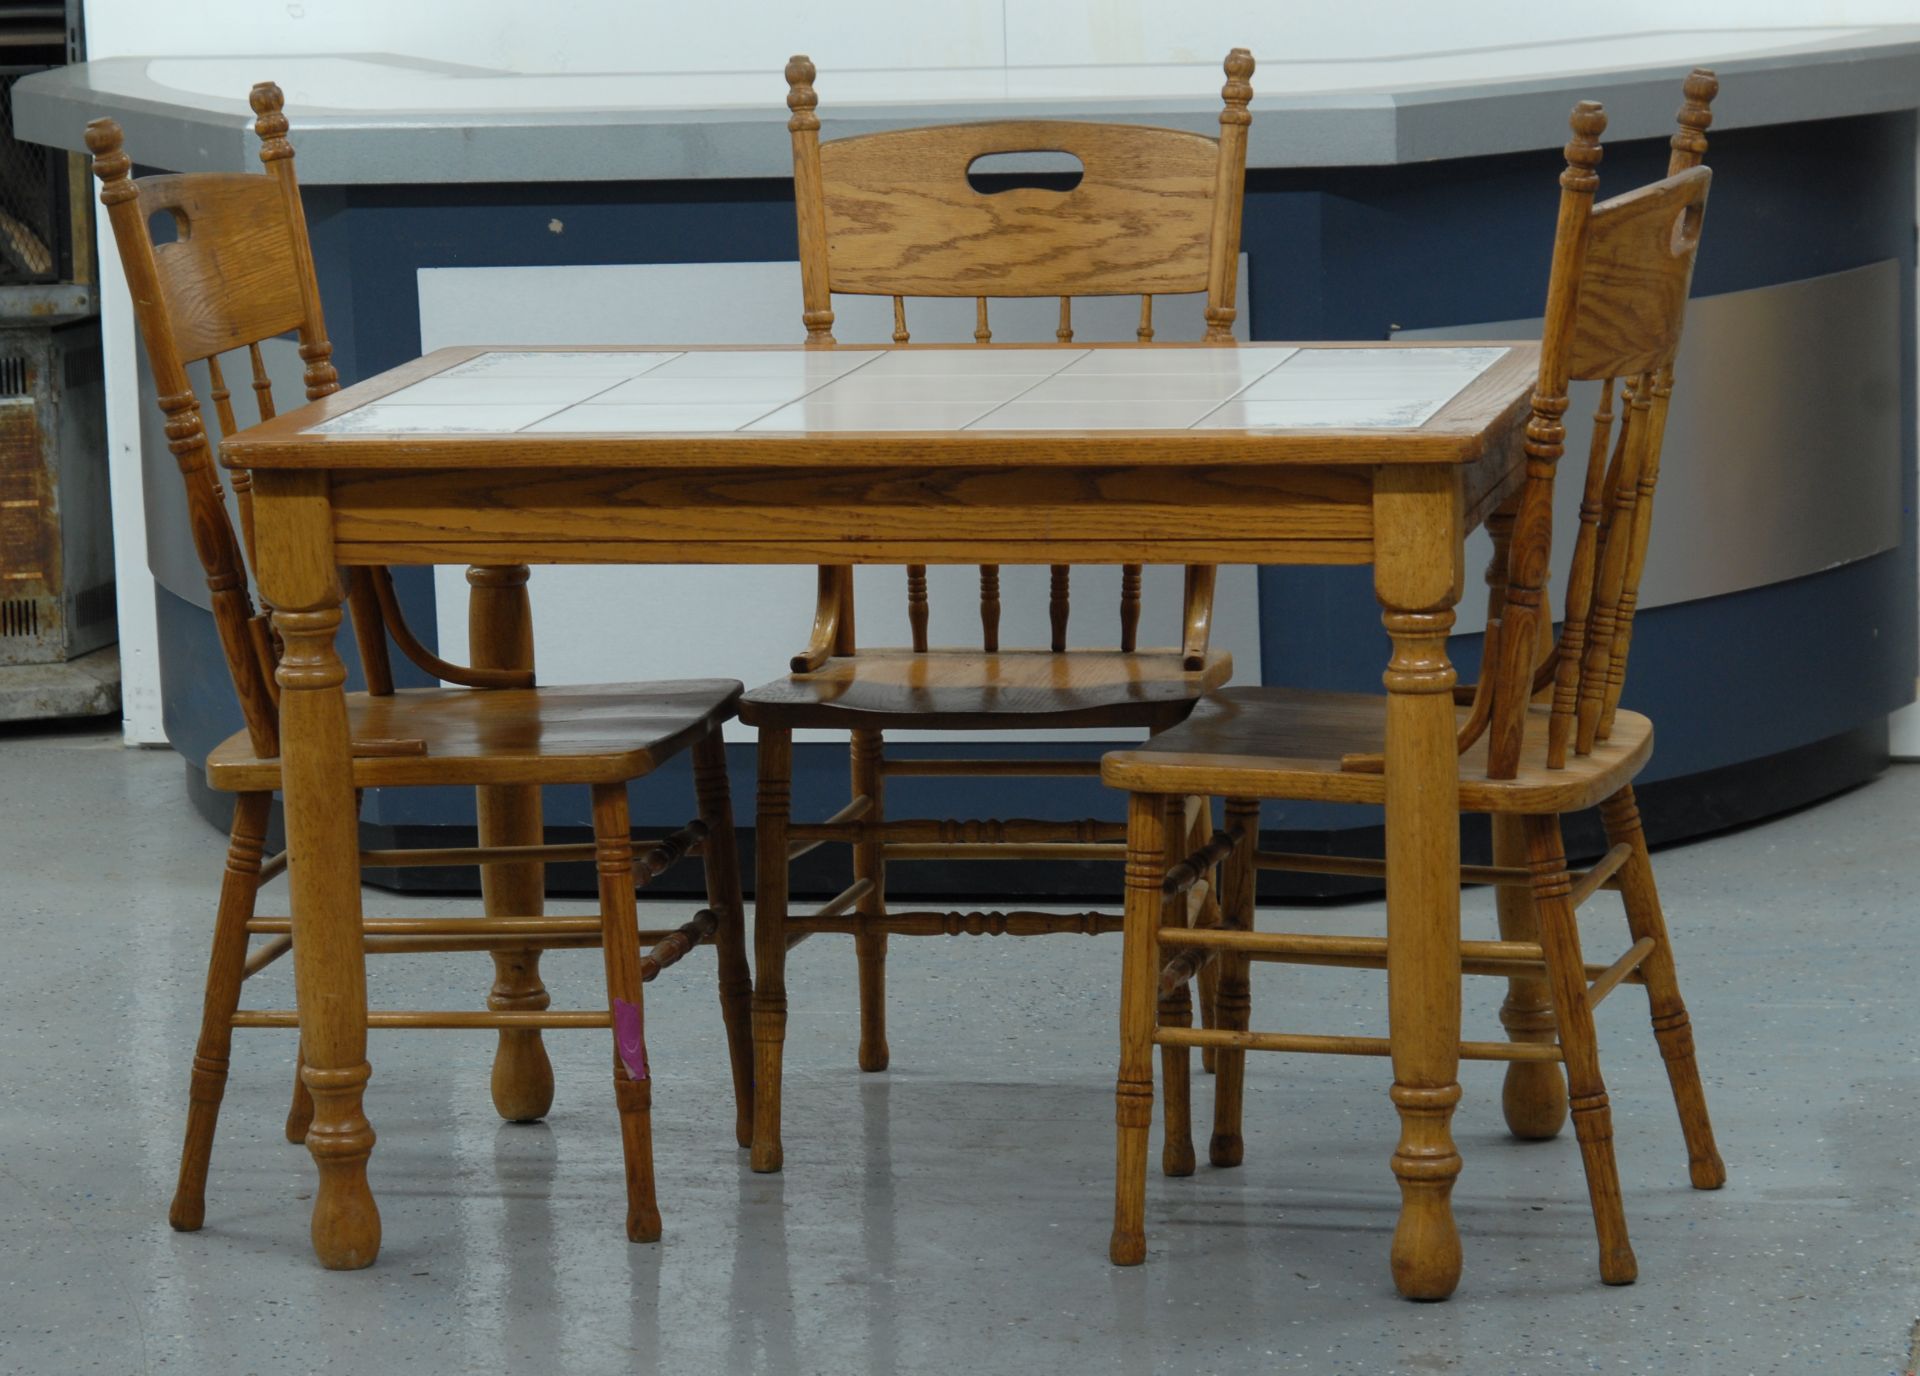 44" x 29" x30" Wooden Kitchen Table with 3 Wooden Chairs